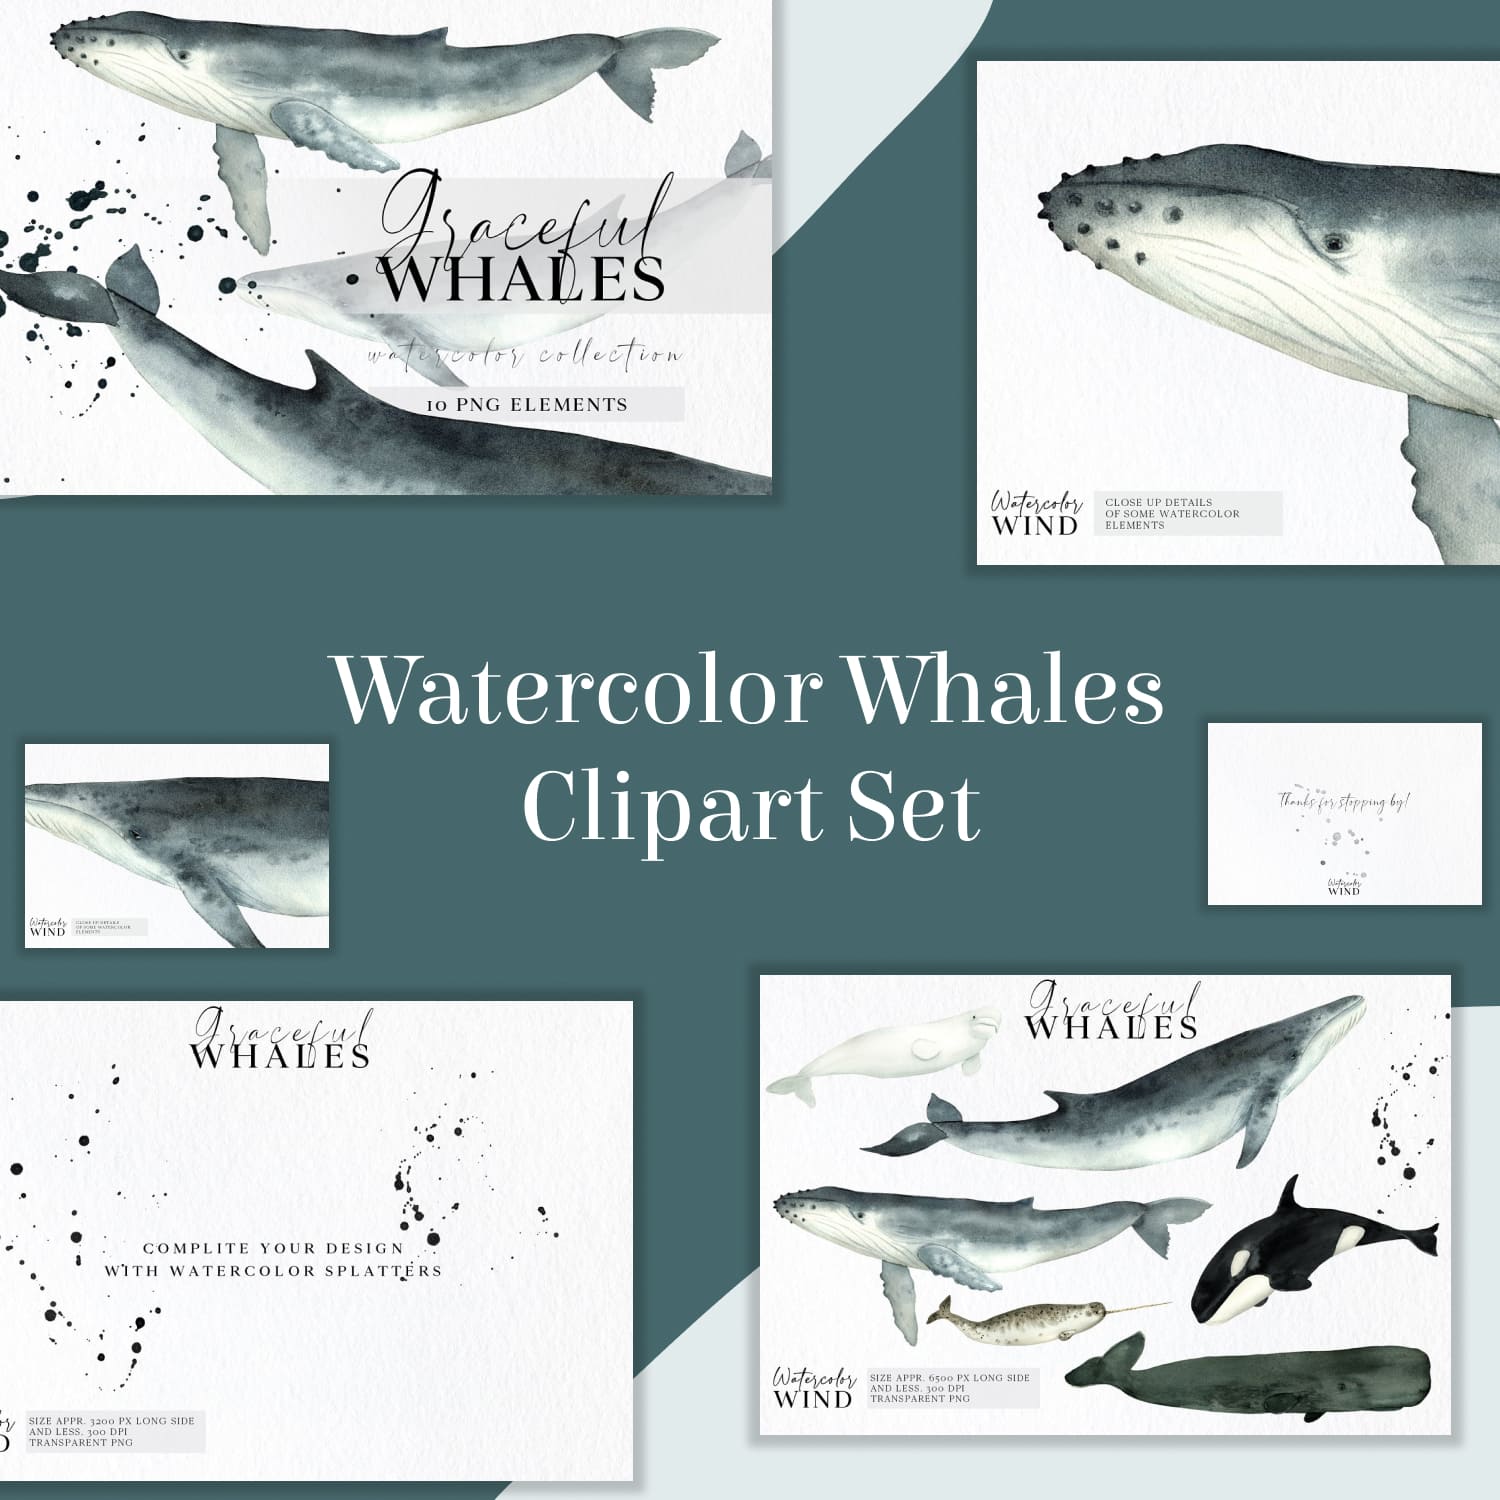 Graceful Watercolor Whales Clipart Set cover image.